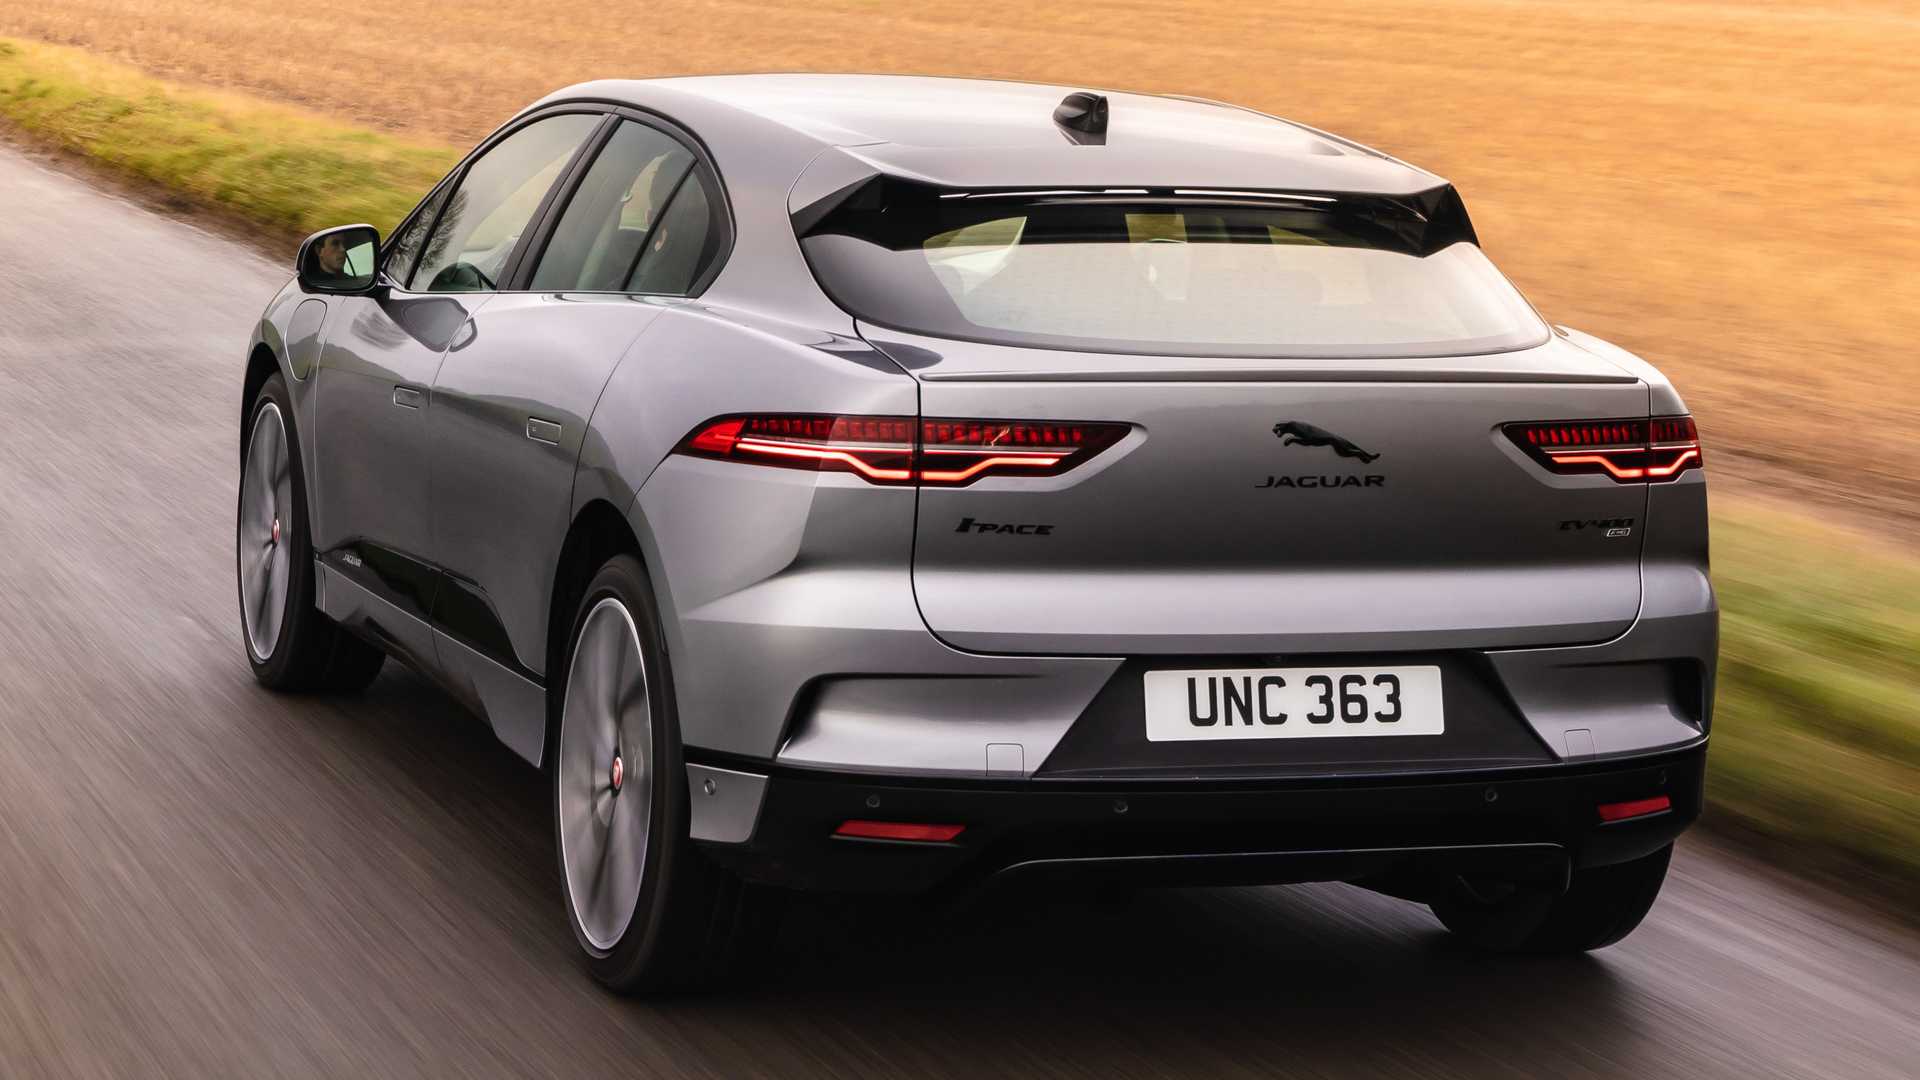 Jaguar-I-Pace-electric-suv-rear-view-car-charger-uk-news